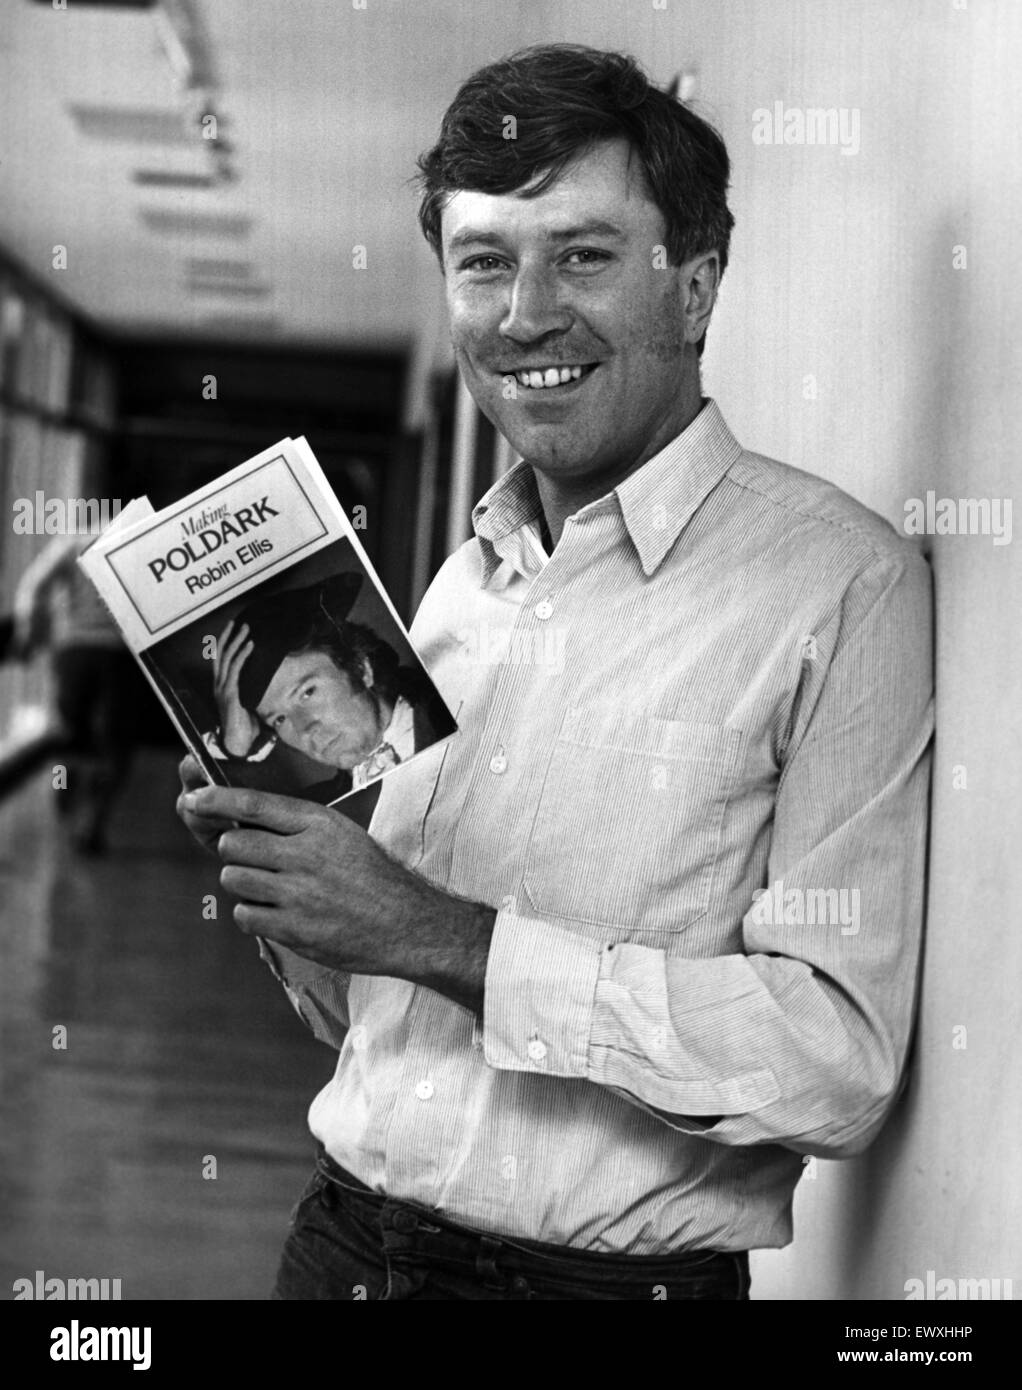 Robin Ellis, star of 'Poldark'  has written a book called Making Poldark, on sale only in Cornwall. 15th September 1978. Stock Photo